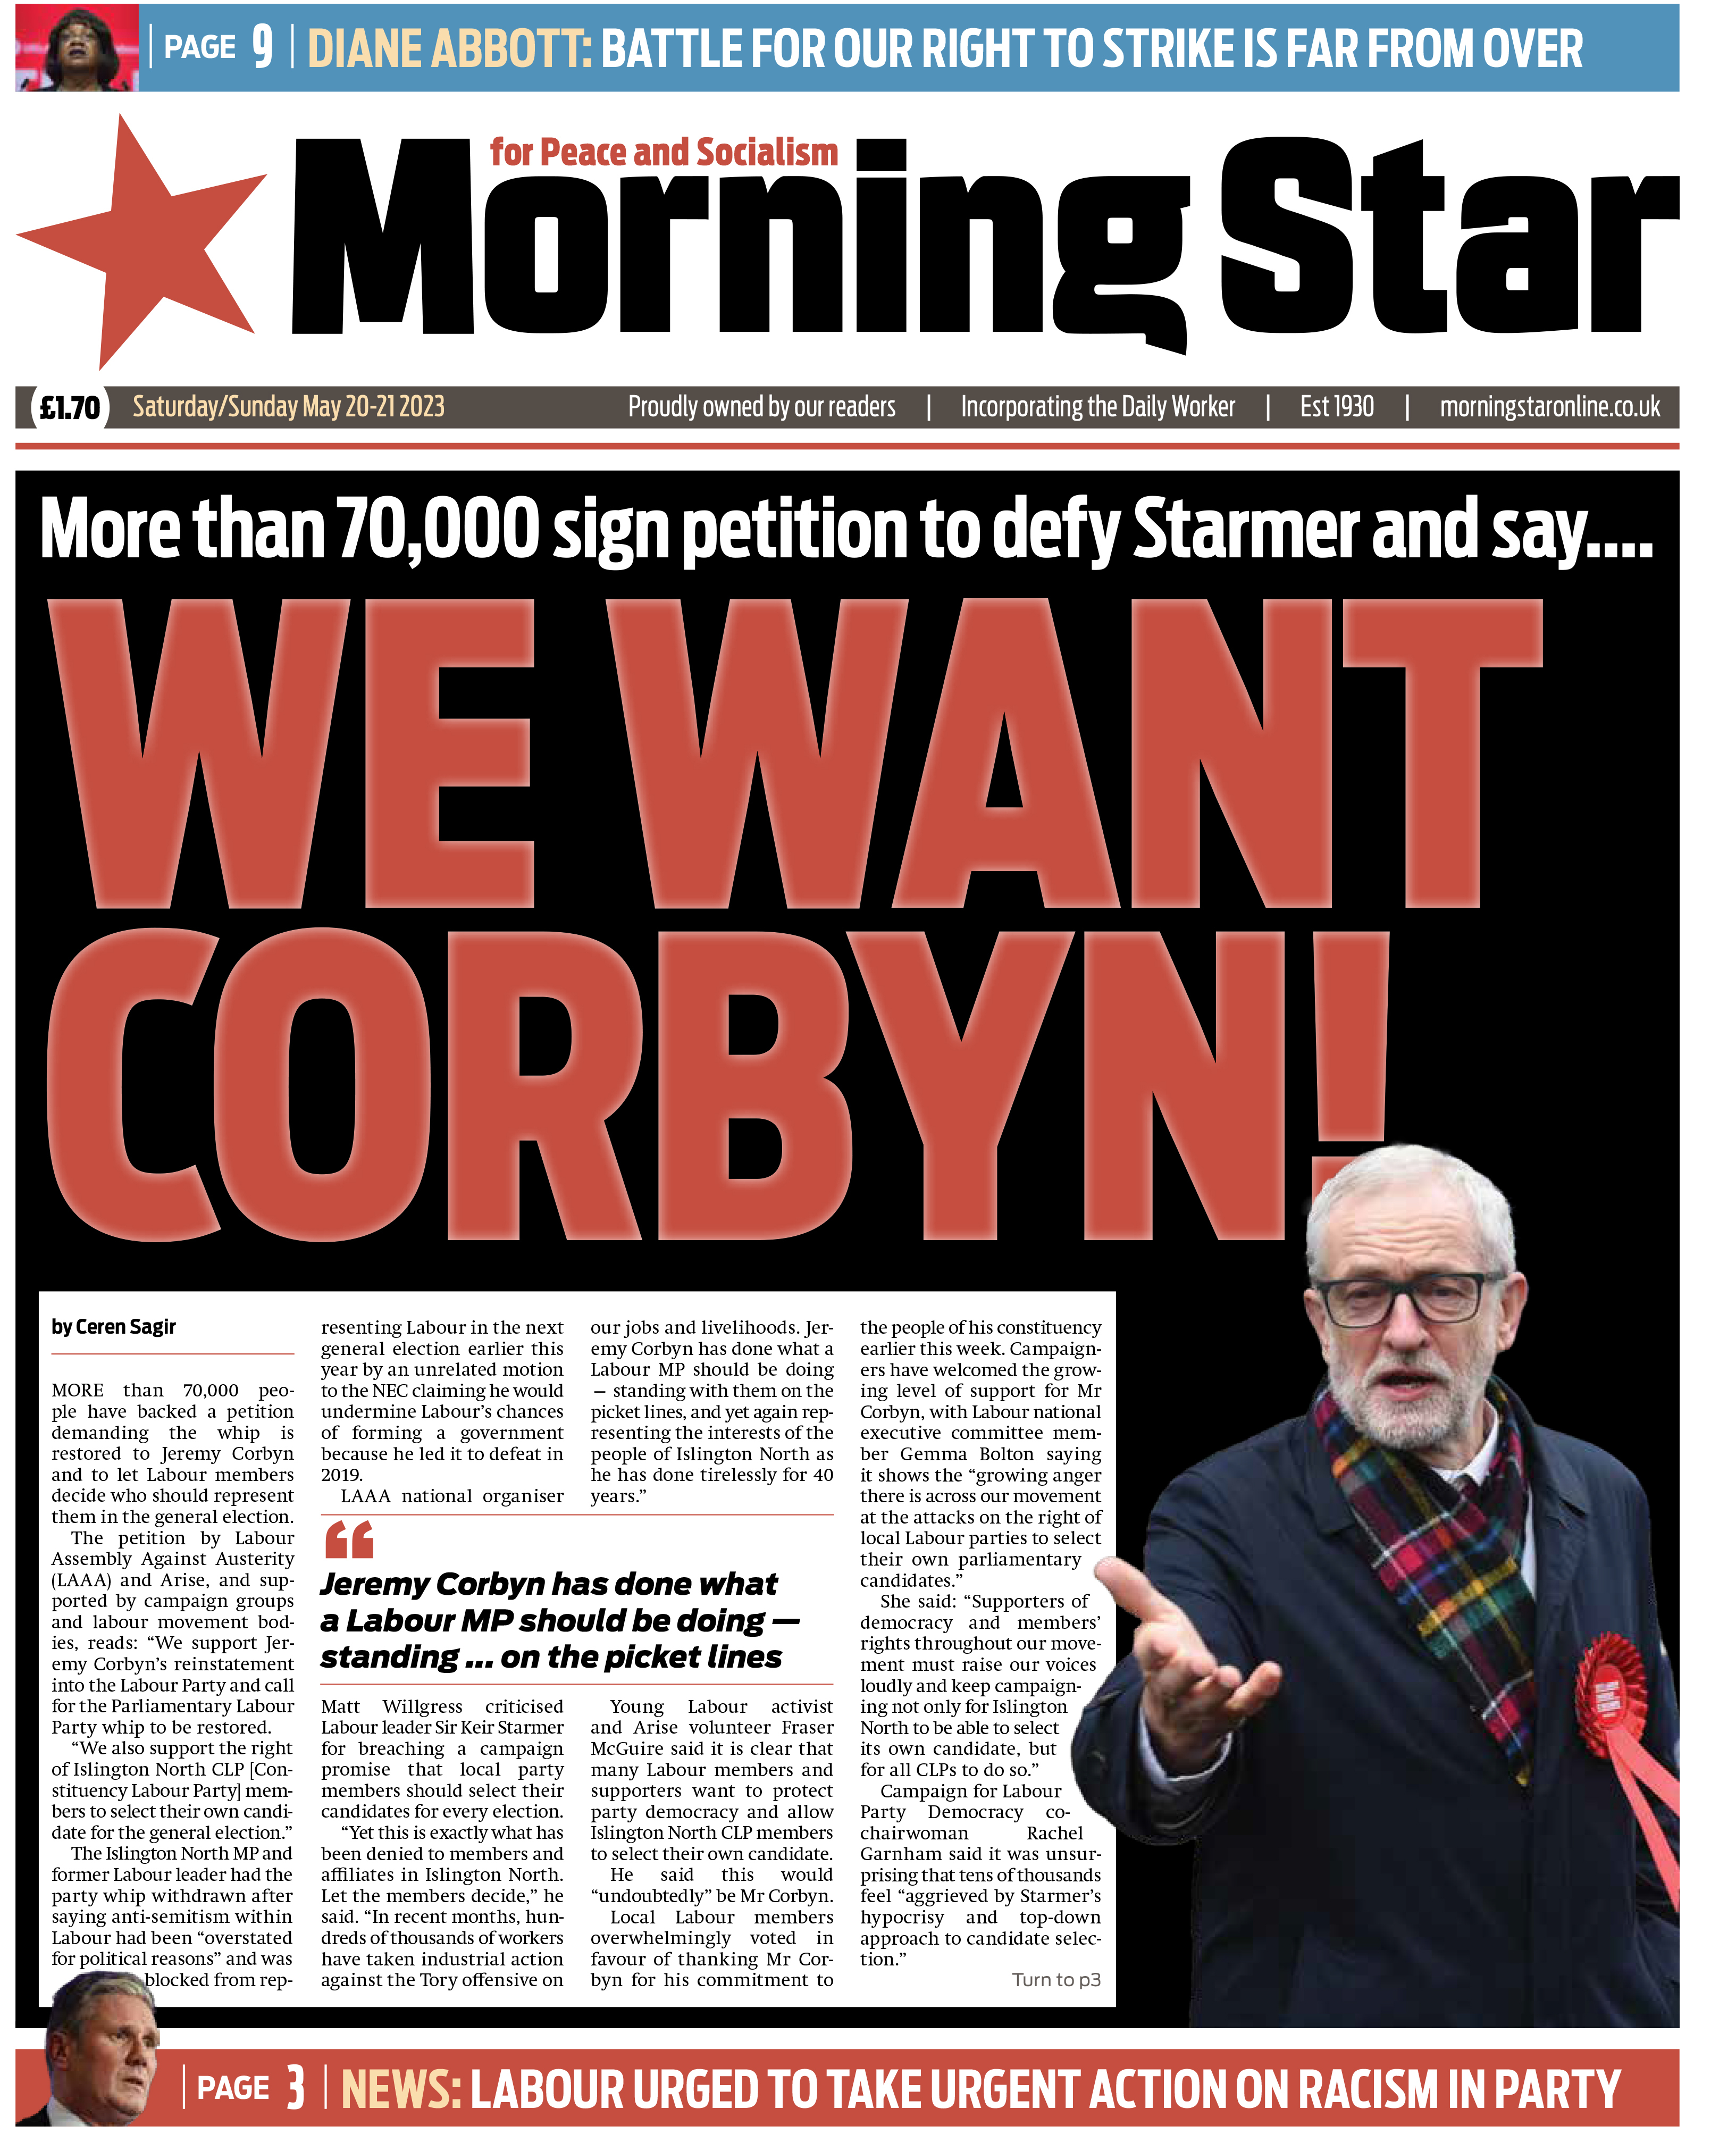 George Mann 🫧⚒️🫧 on Twitter: "Morning Star: We want Corbyn  #TomorrowsPapersToday https://t.co/YBTe4hLhRB" / Twitter